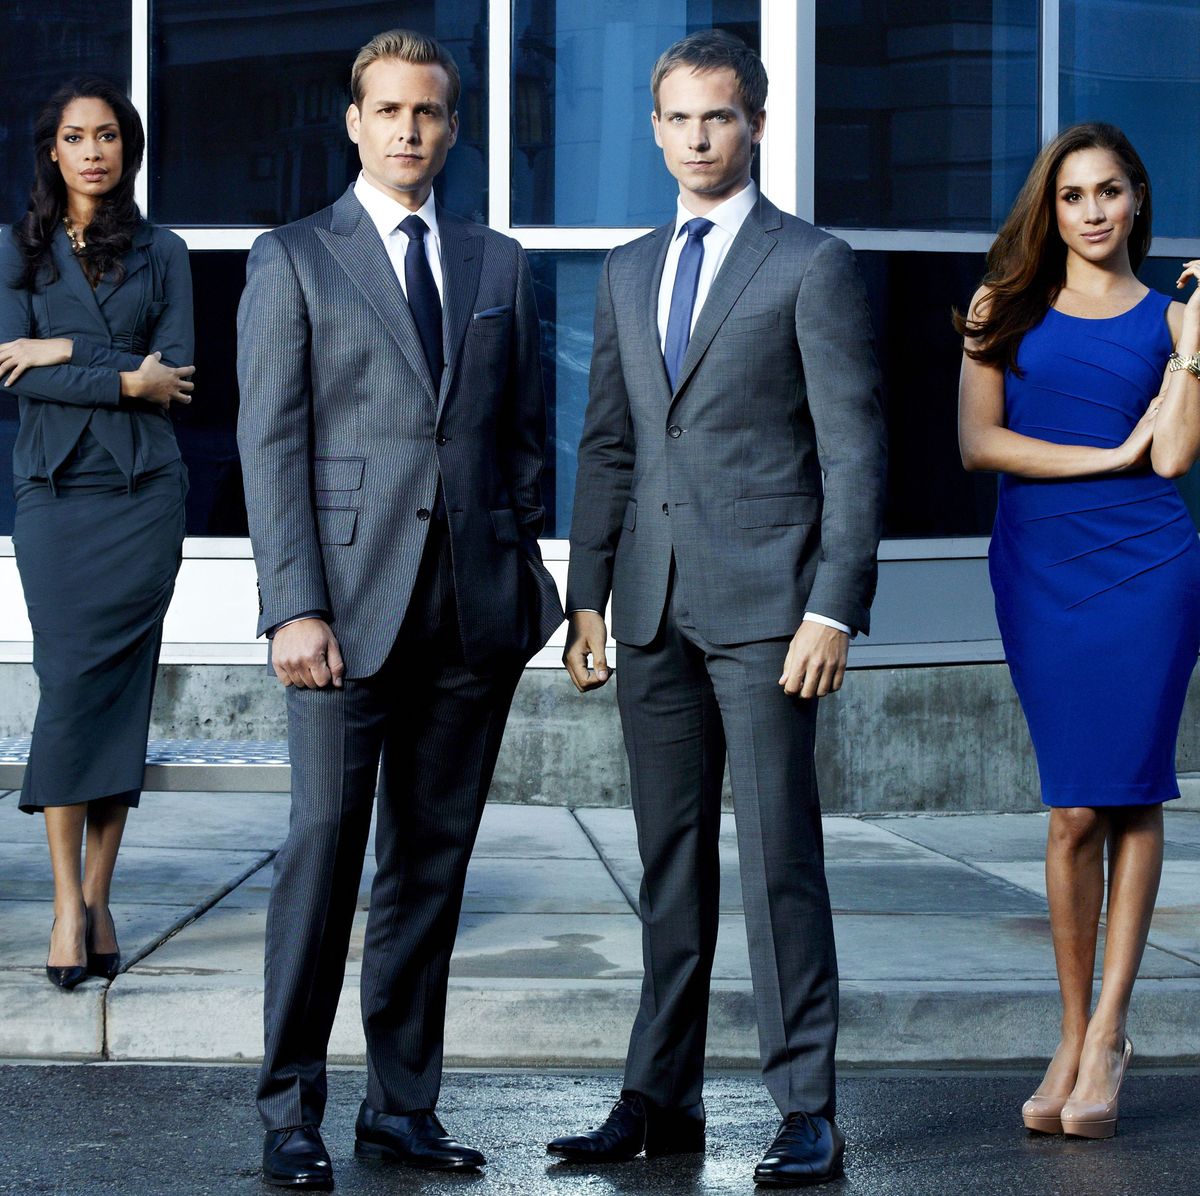 A New 'Suits' Show Is in the Works: Everything We Know So Far